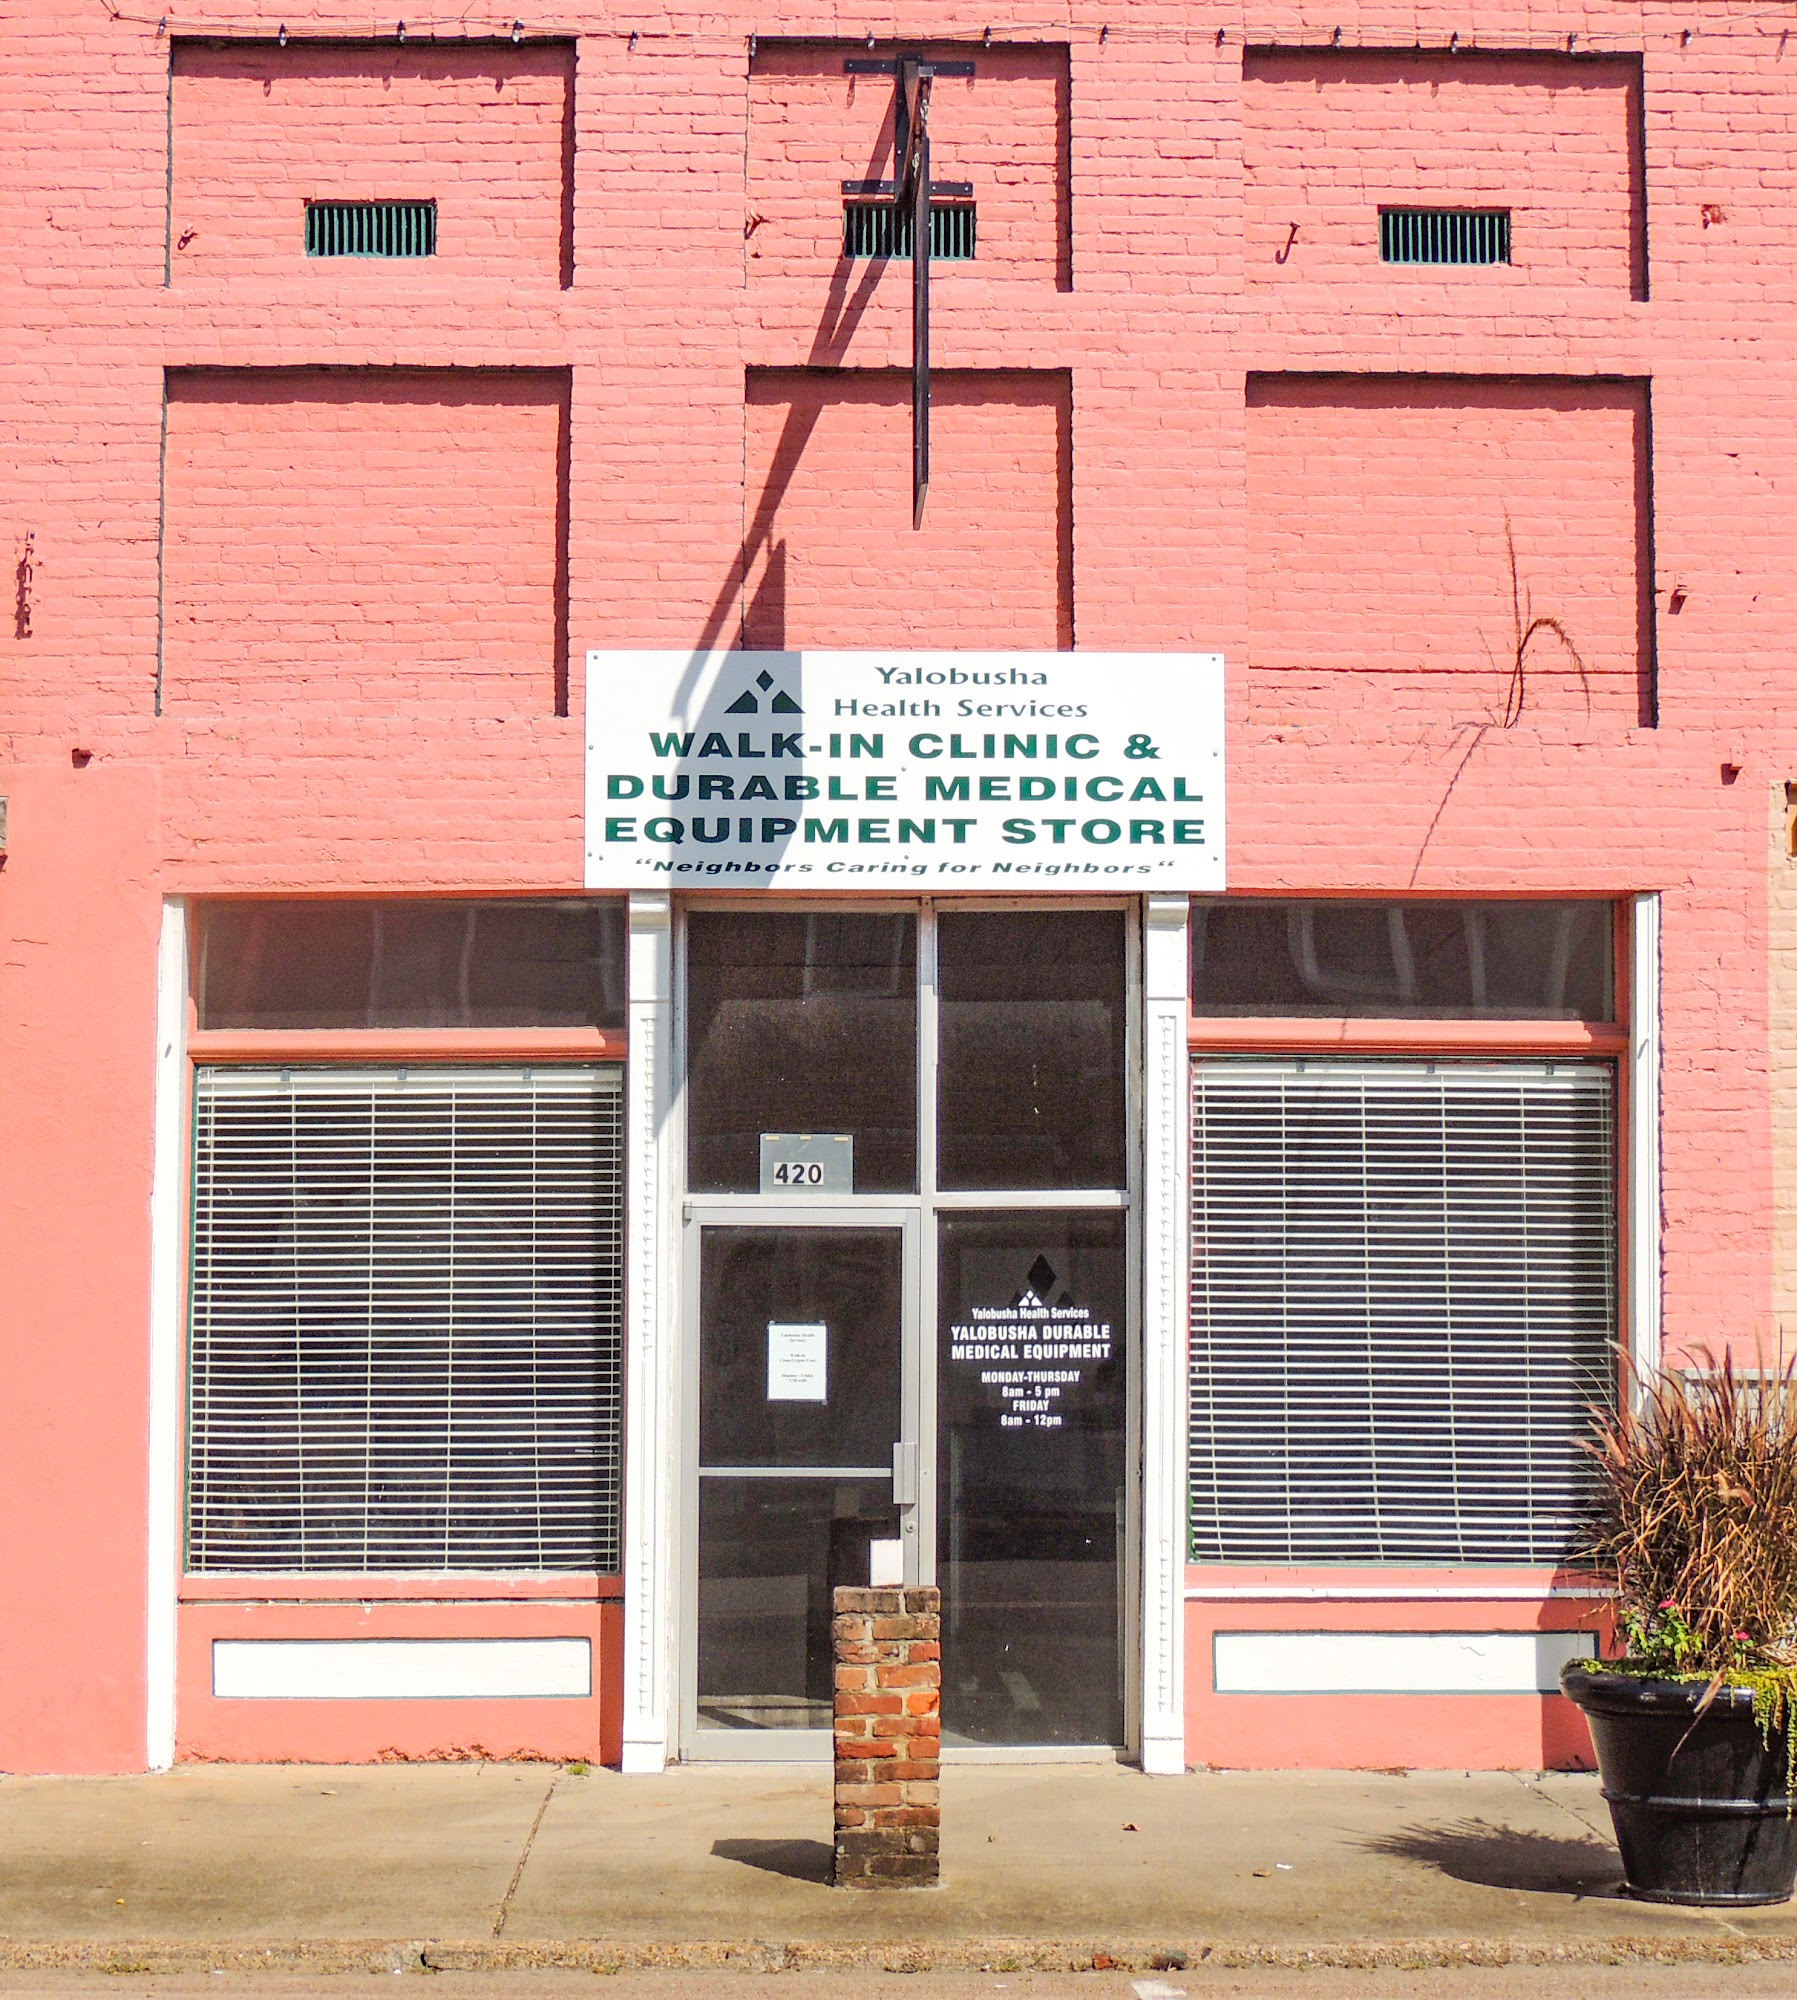 Yalobusha Health Services Walk-In Clinic & Durable Medical Equipment Store 420 N Main St, Water Valley Mississippi 38965